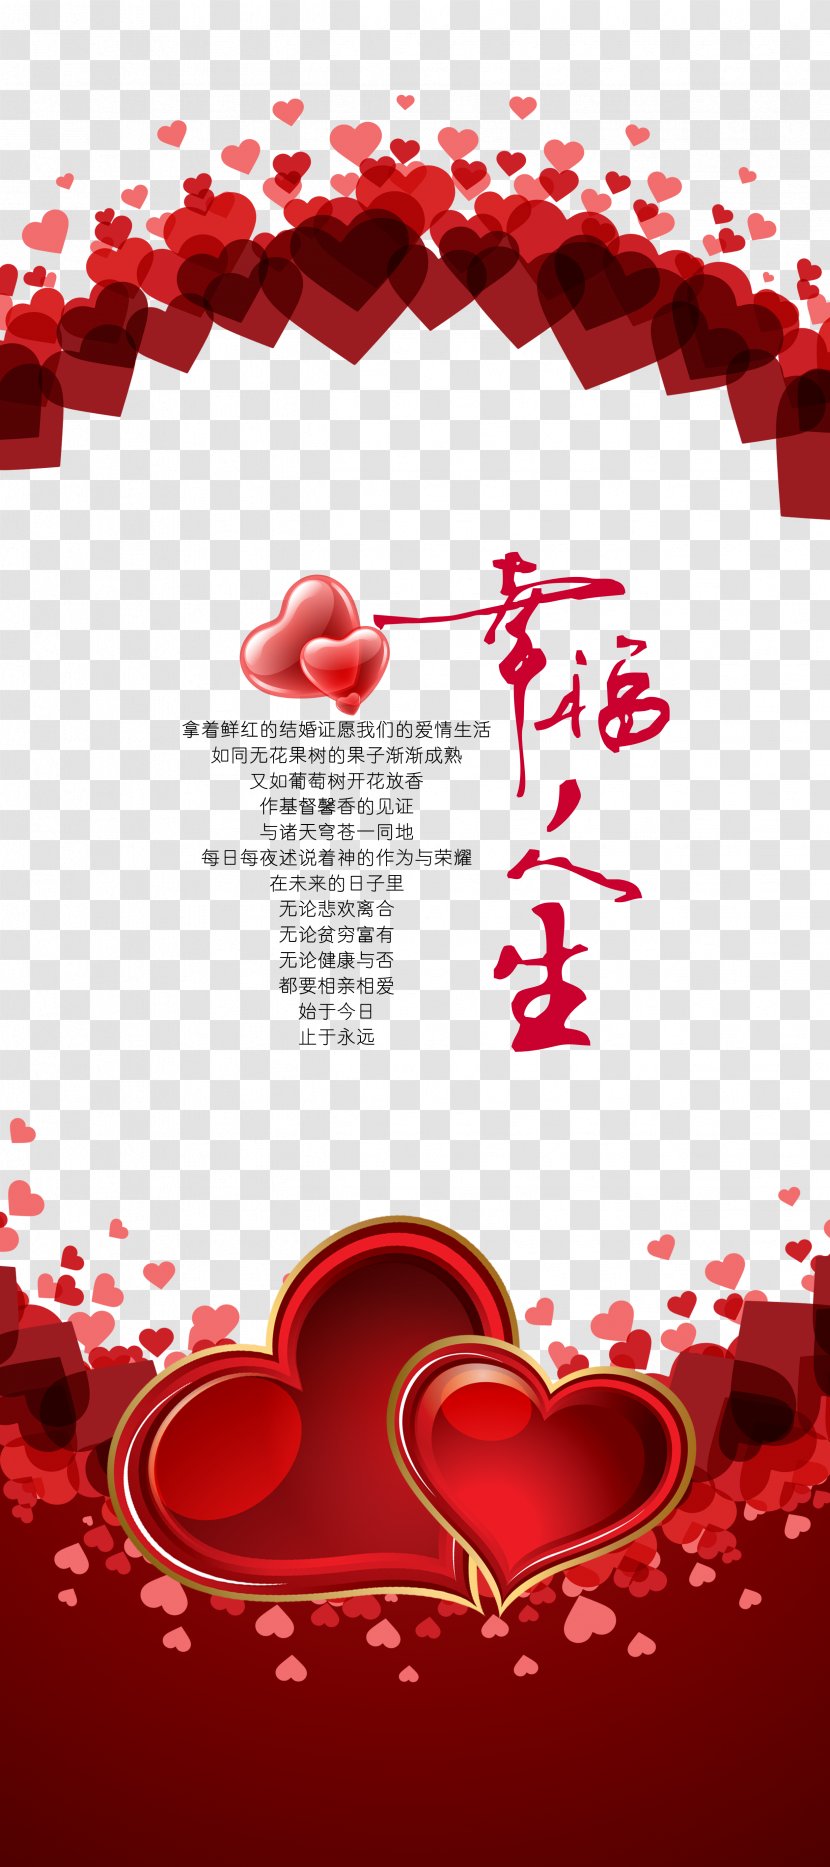 Poster Download - Text - Wedding Chin Transparent PNG